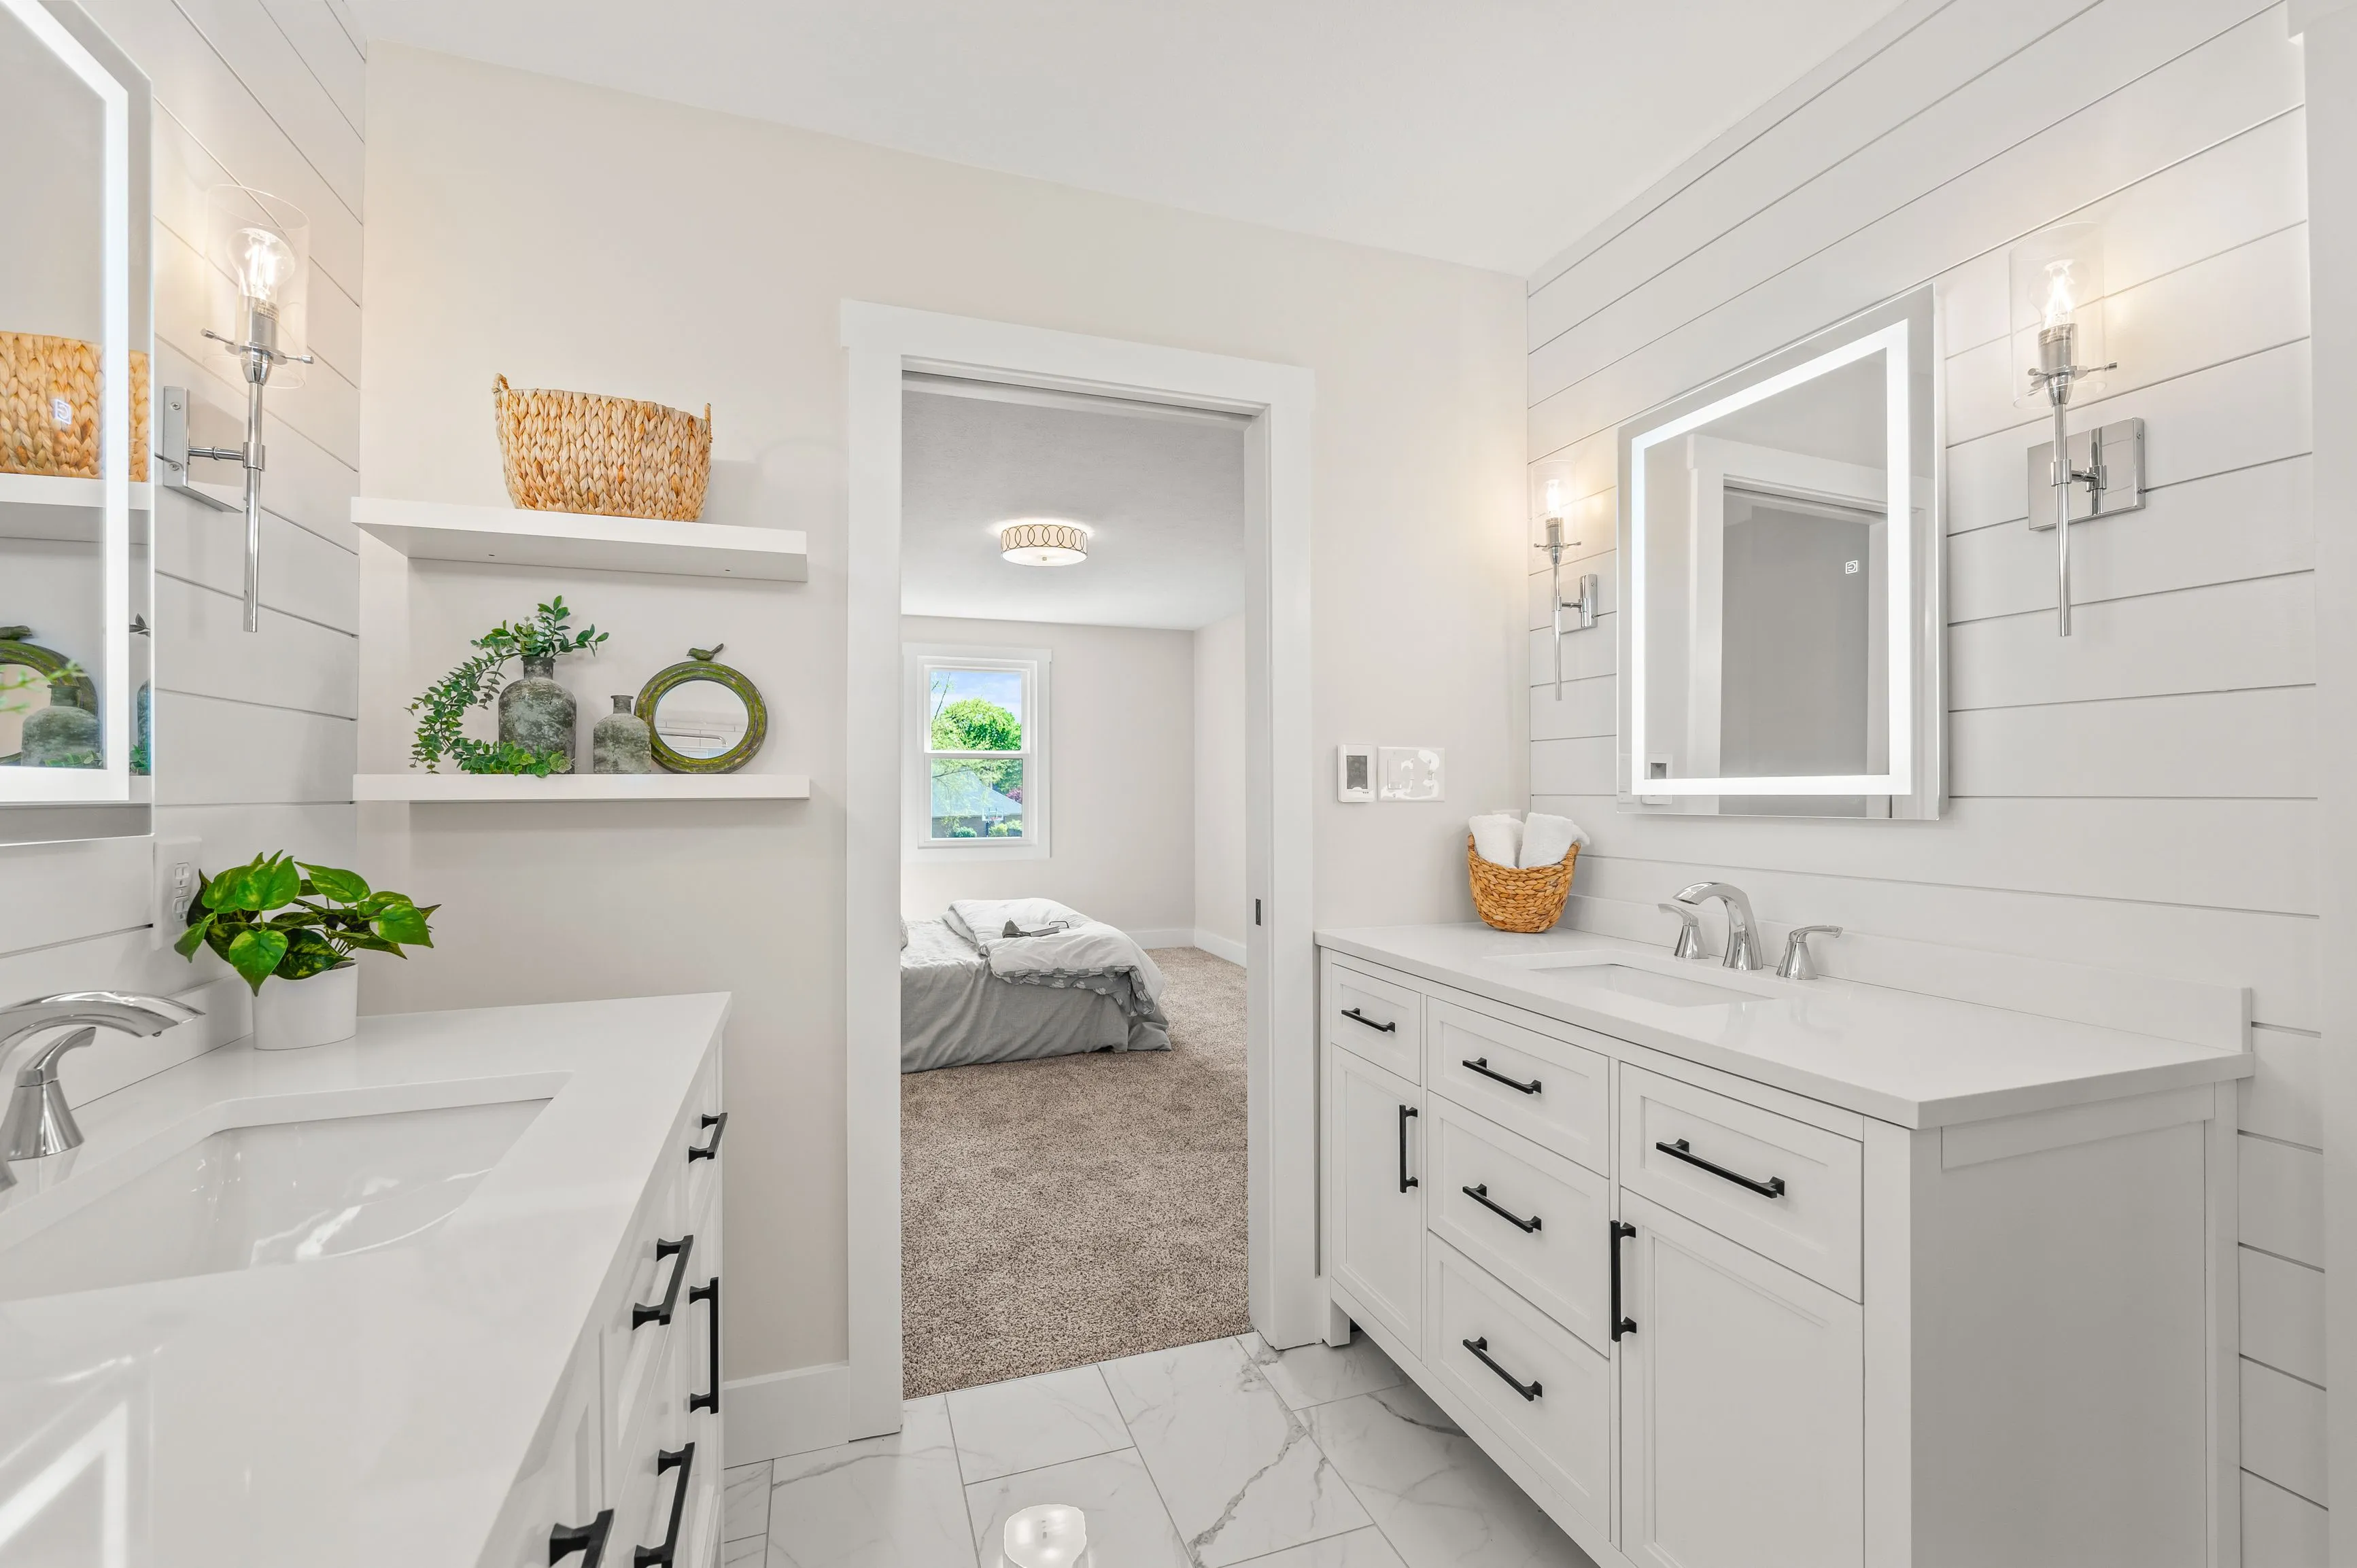 Modern bright bathroom interior with white cabinets, double sink, large mirror and a view into bedroom.